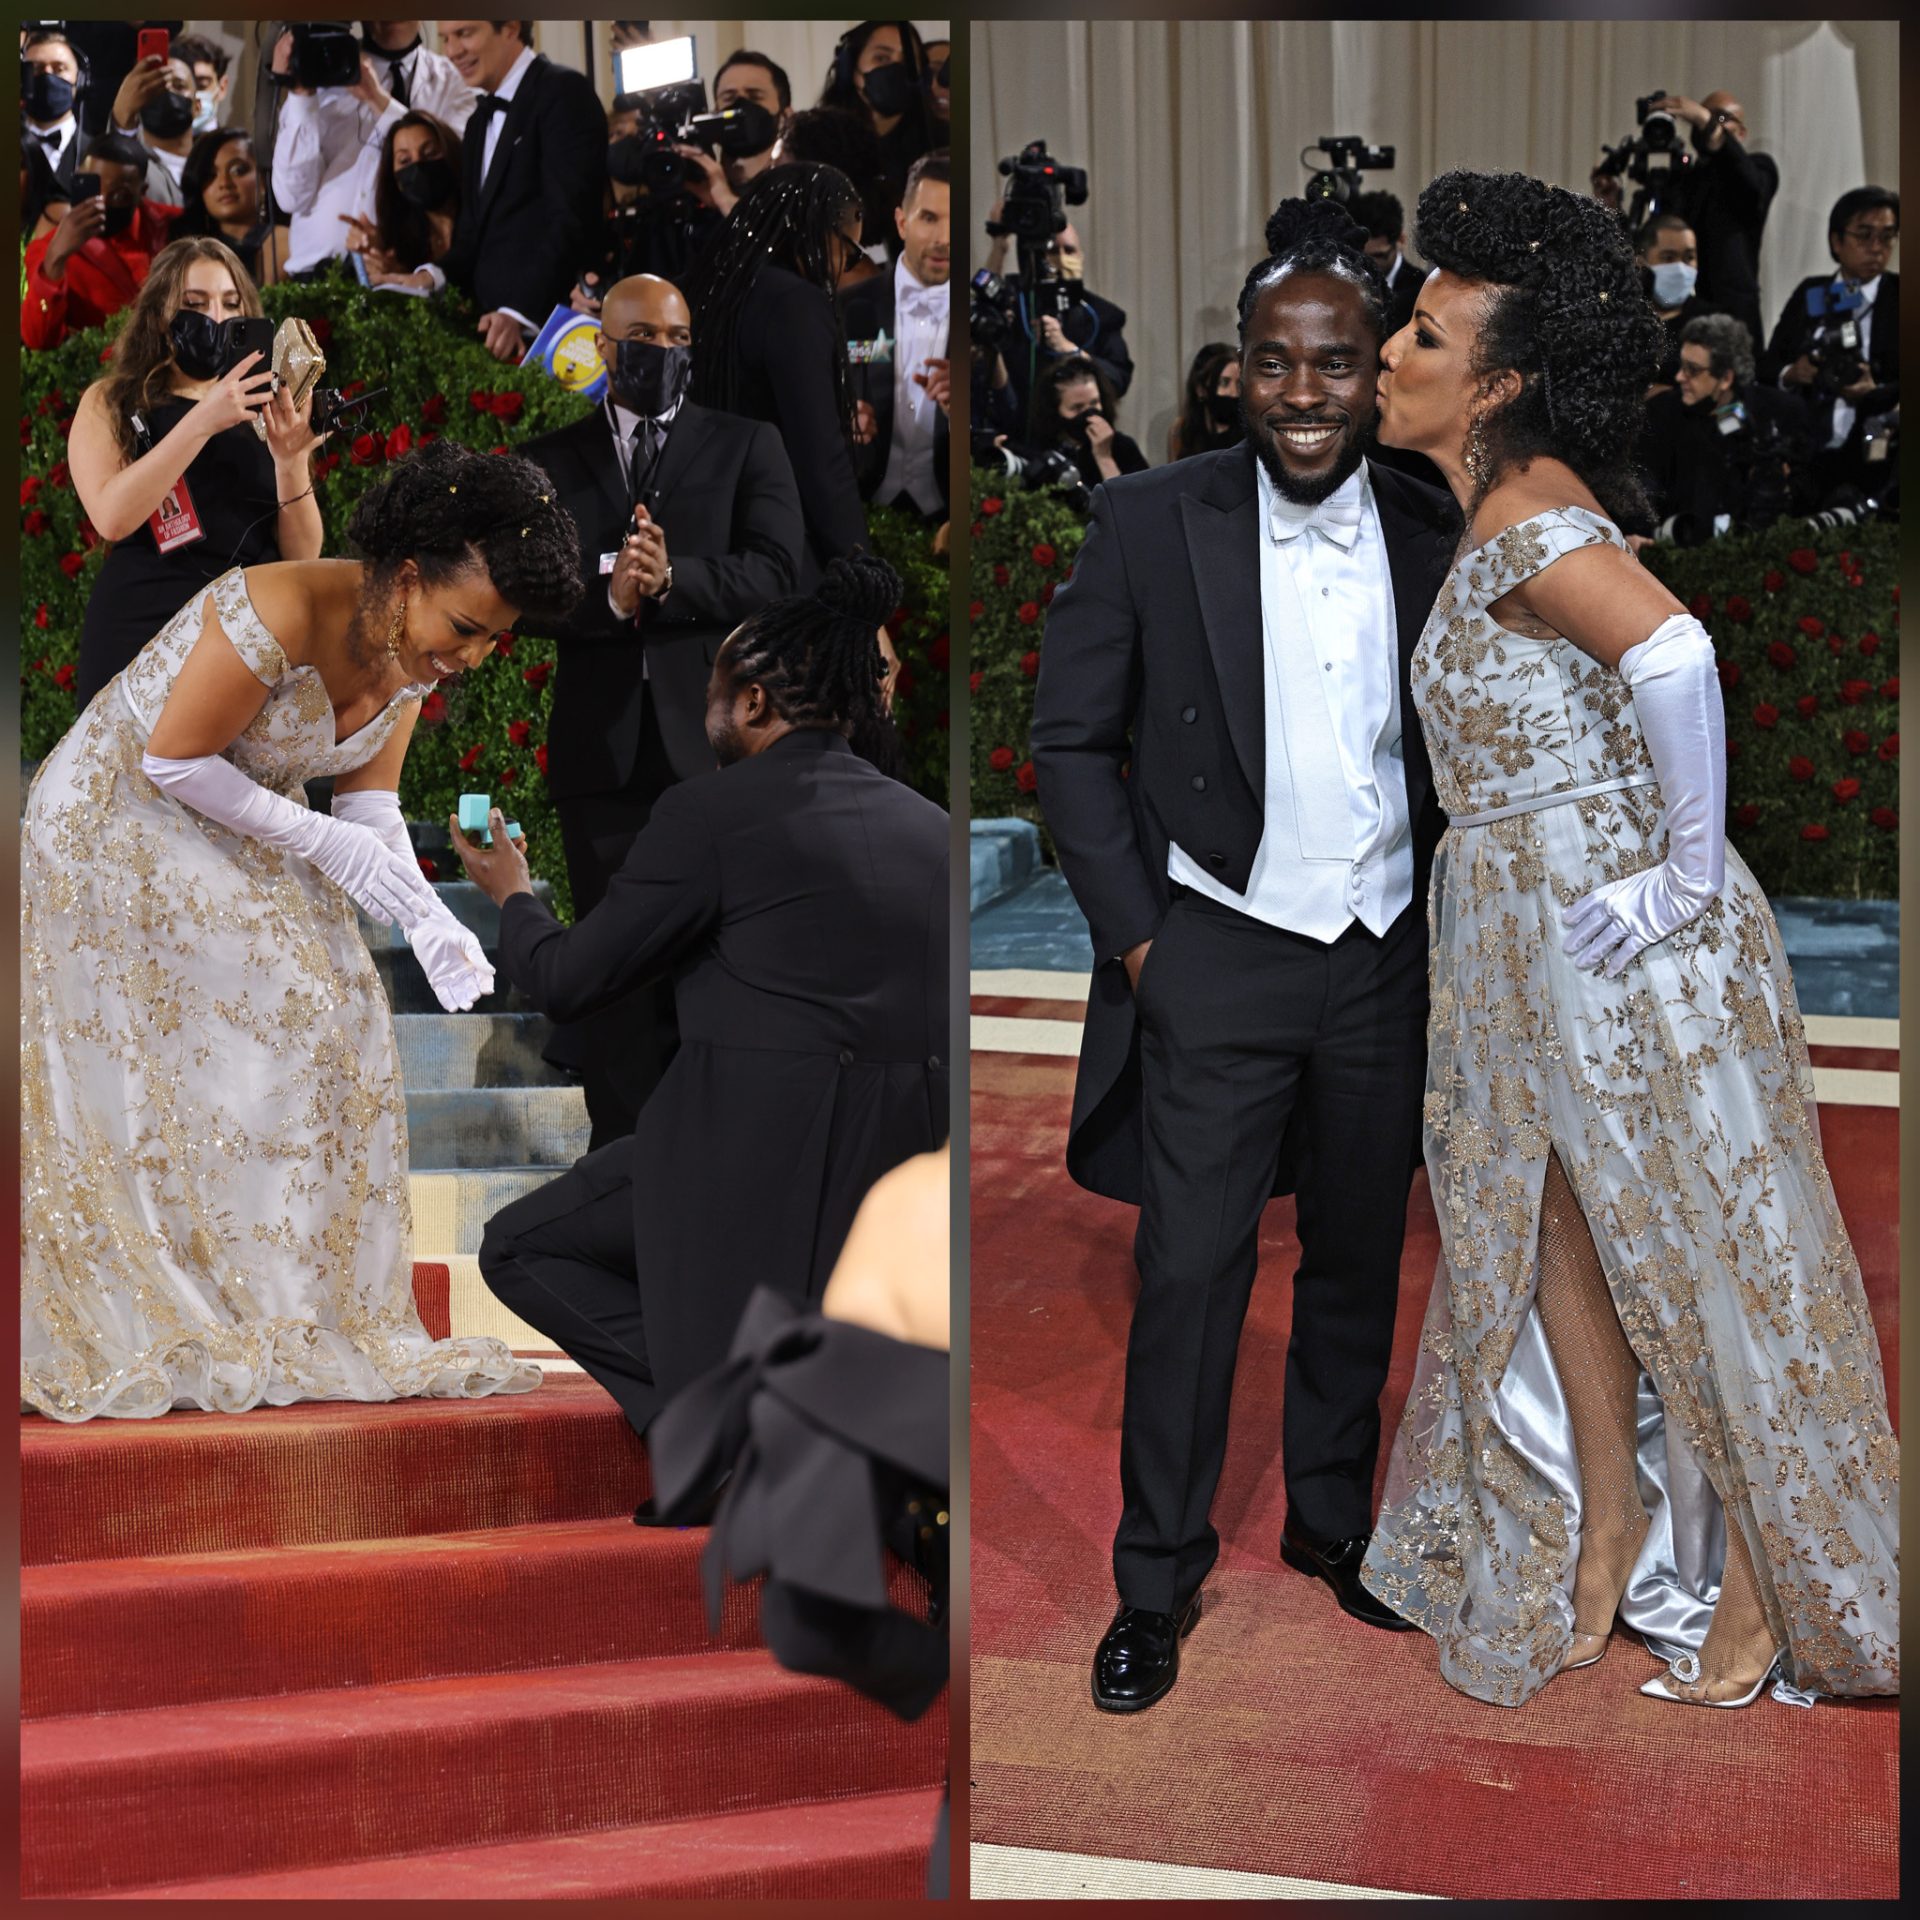 New York Political Couple Gets Engaged On The Met Gala Red Carpet Putting Black Love Front And Center!